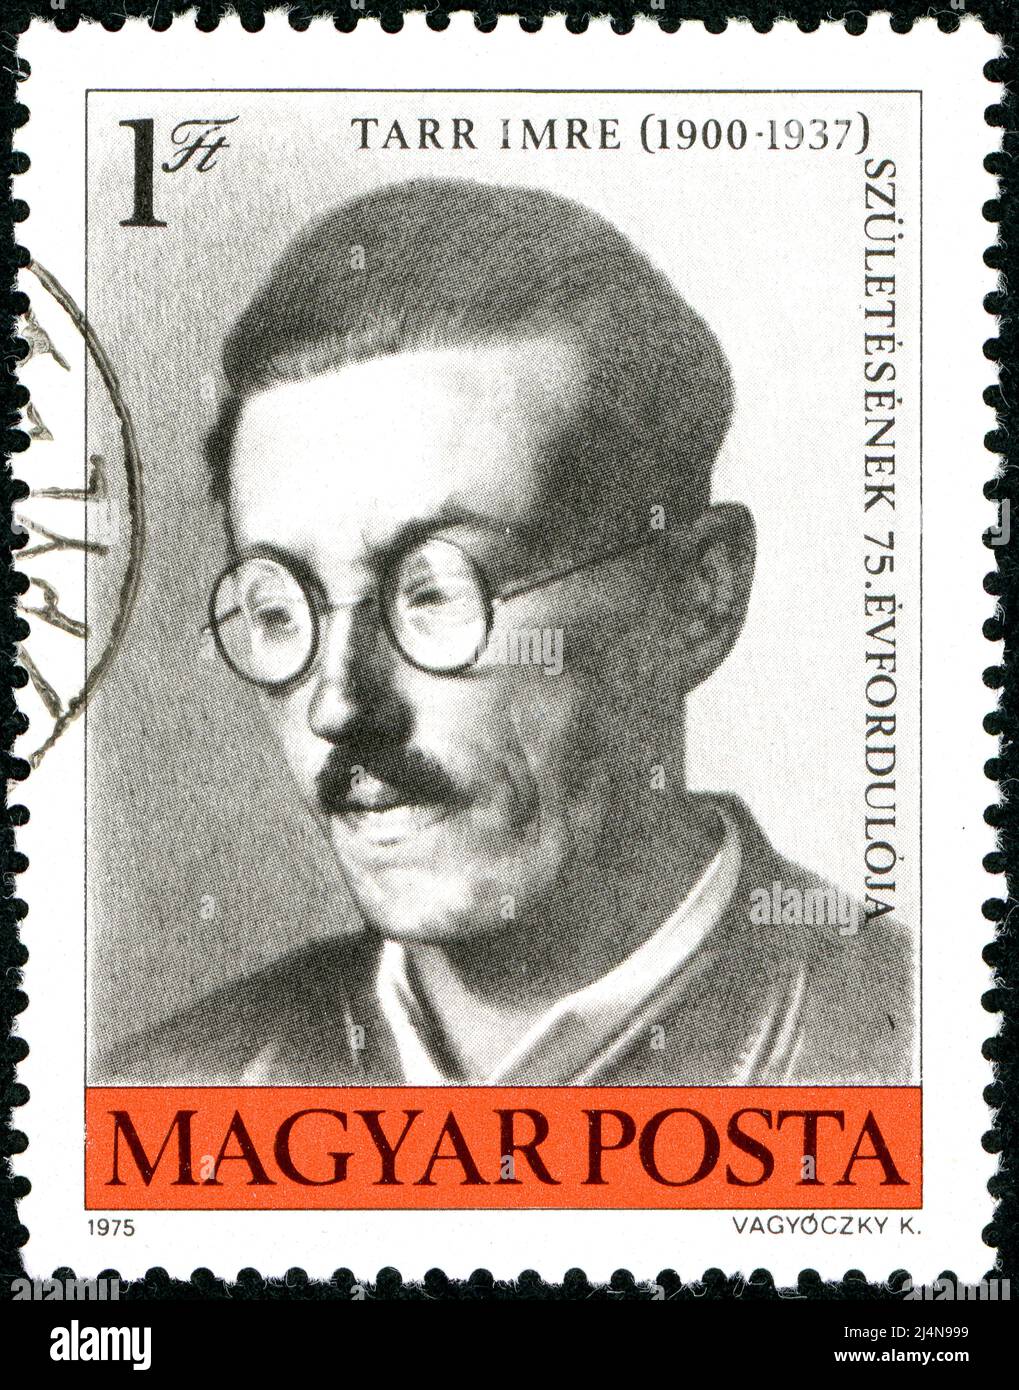 Postage stamp printed in Hungary, depicted portrait of Imre Tarr, a Hungarian political activist, one of the leaders of the labor movement, circa 1975 Stock Photo